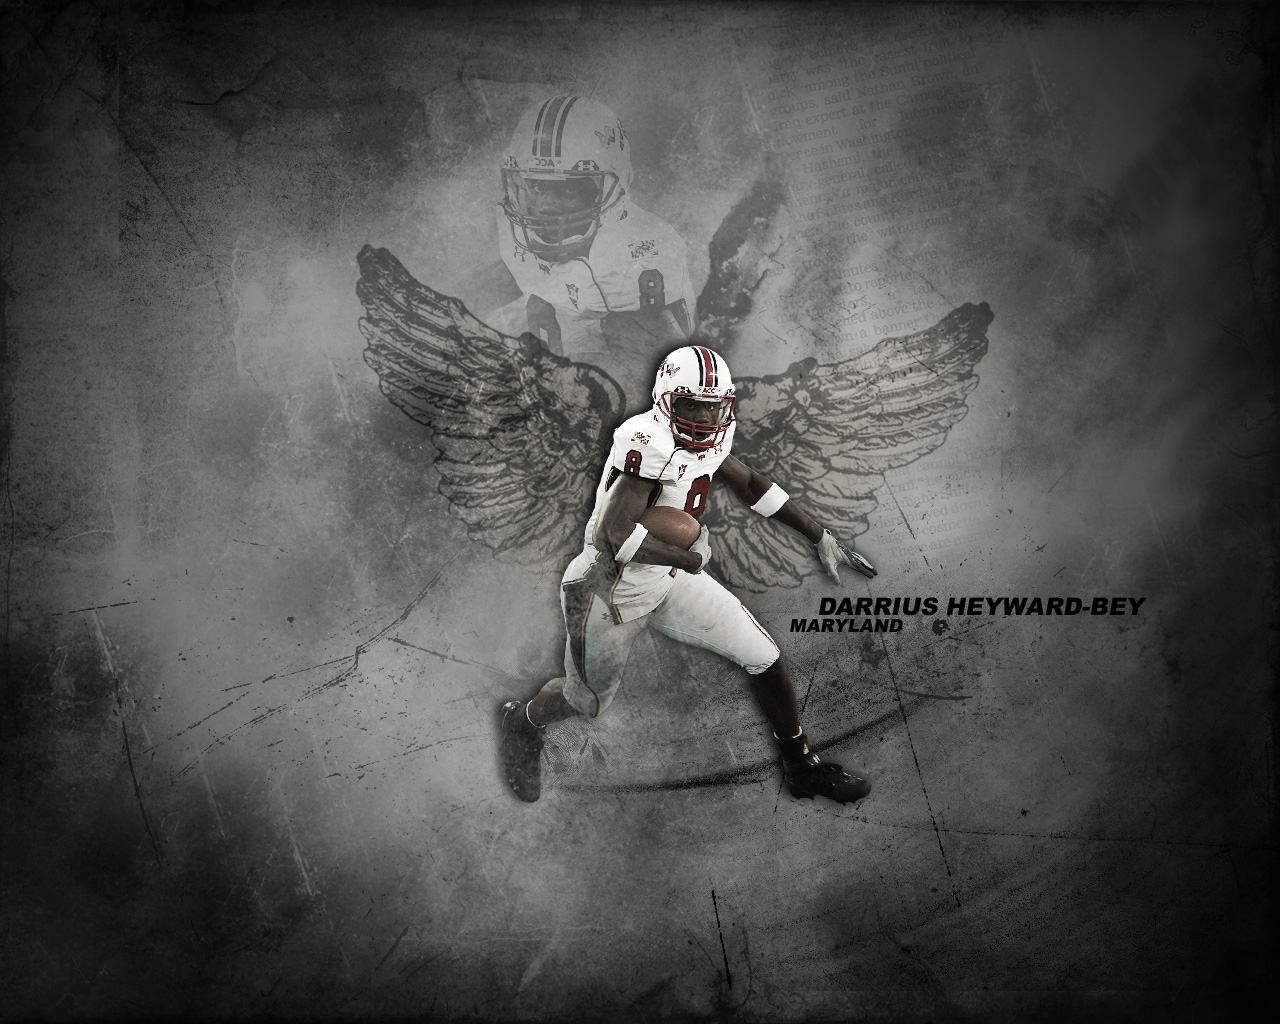 Hope You Like This Oakland Raiders Wallpaper HD Wallpaper As Much ...